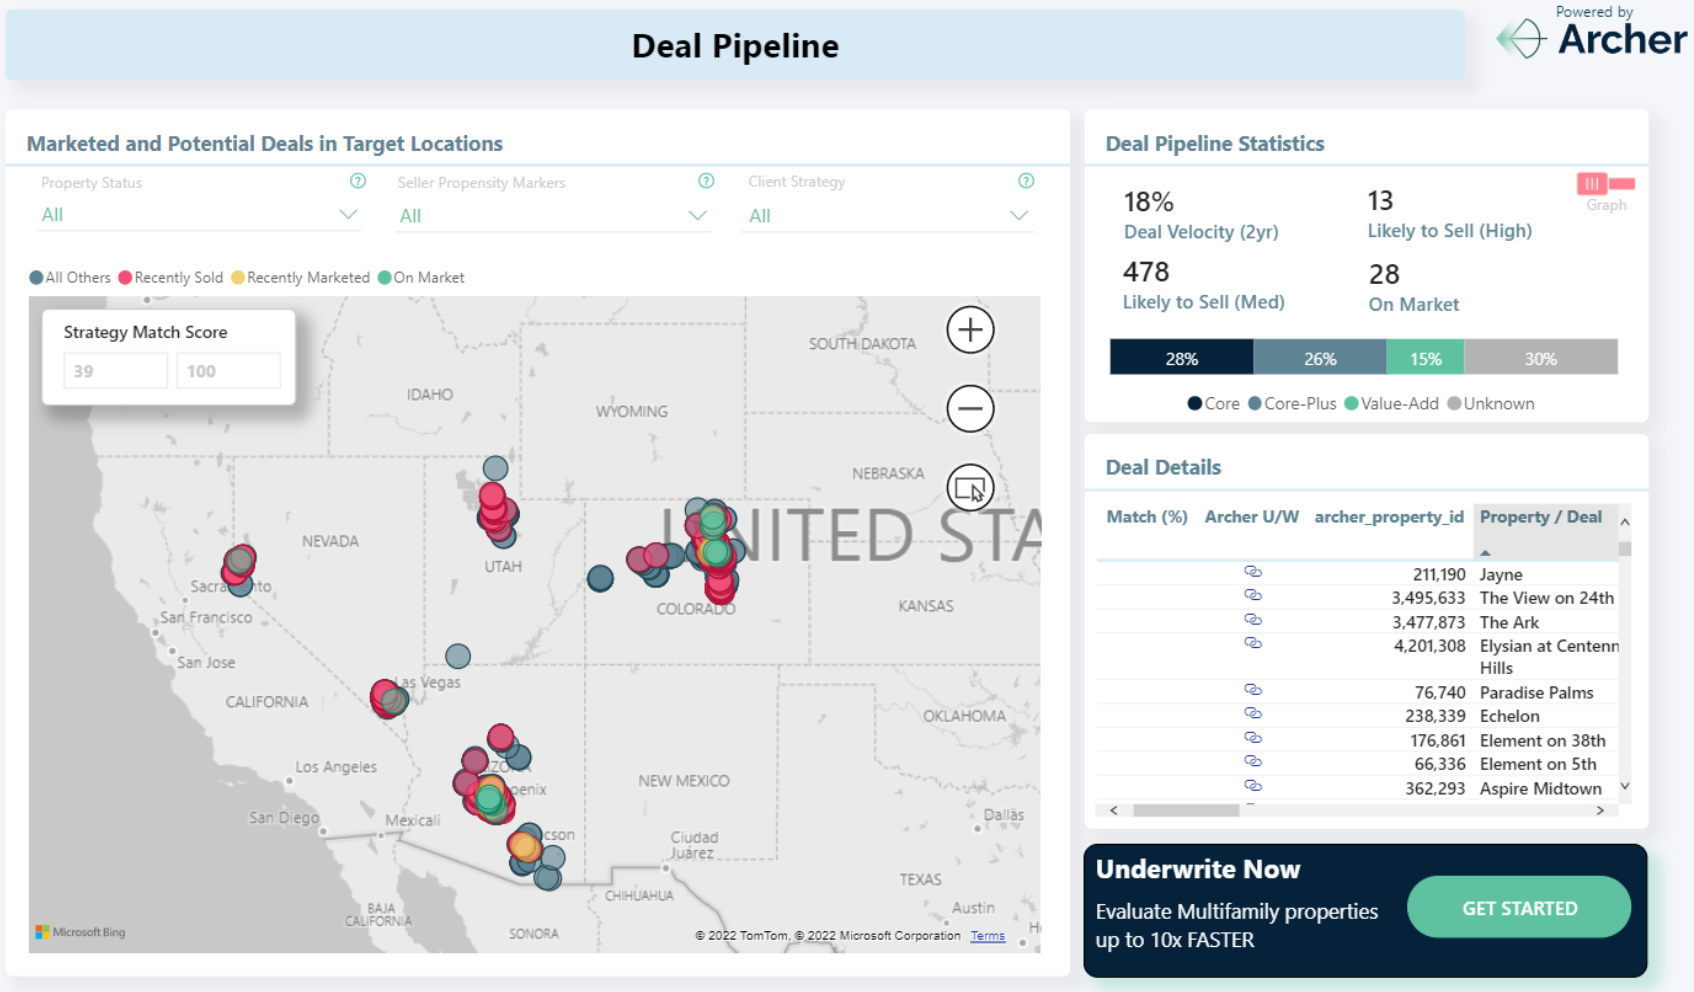 Showcase your deal pipeline